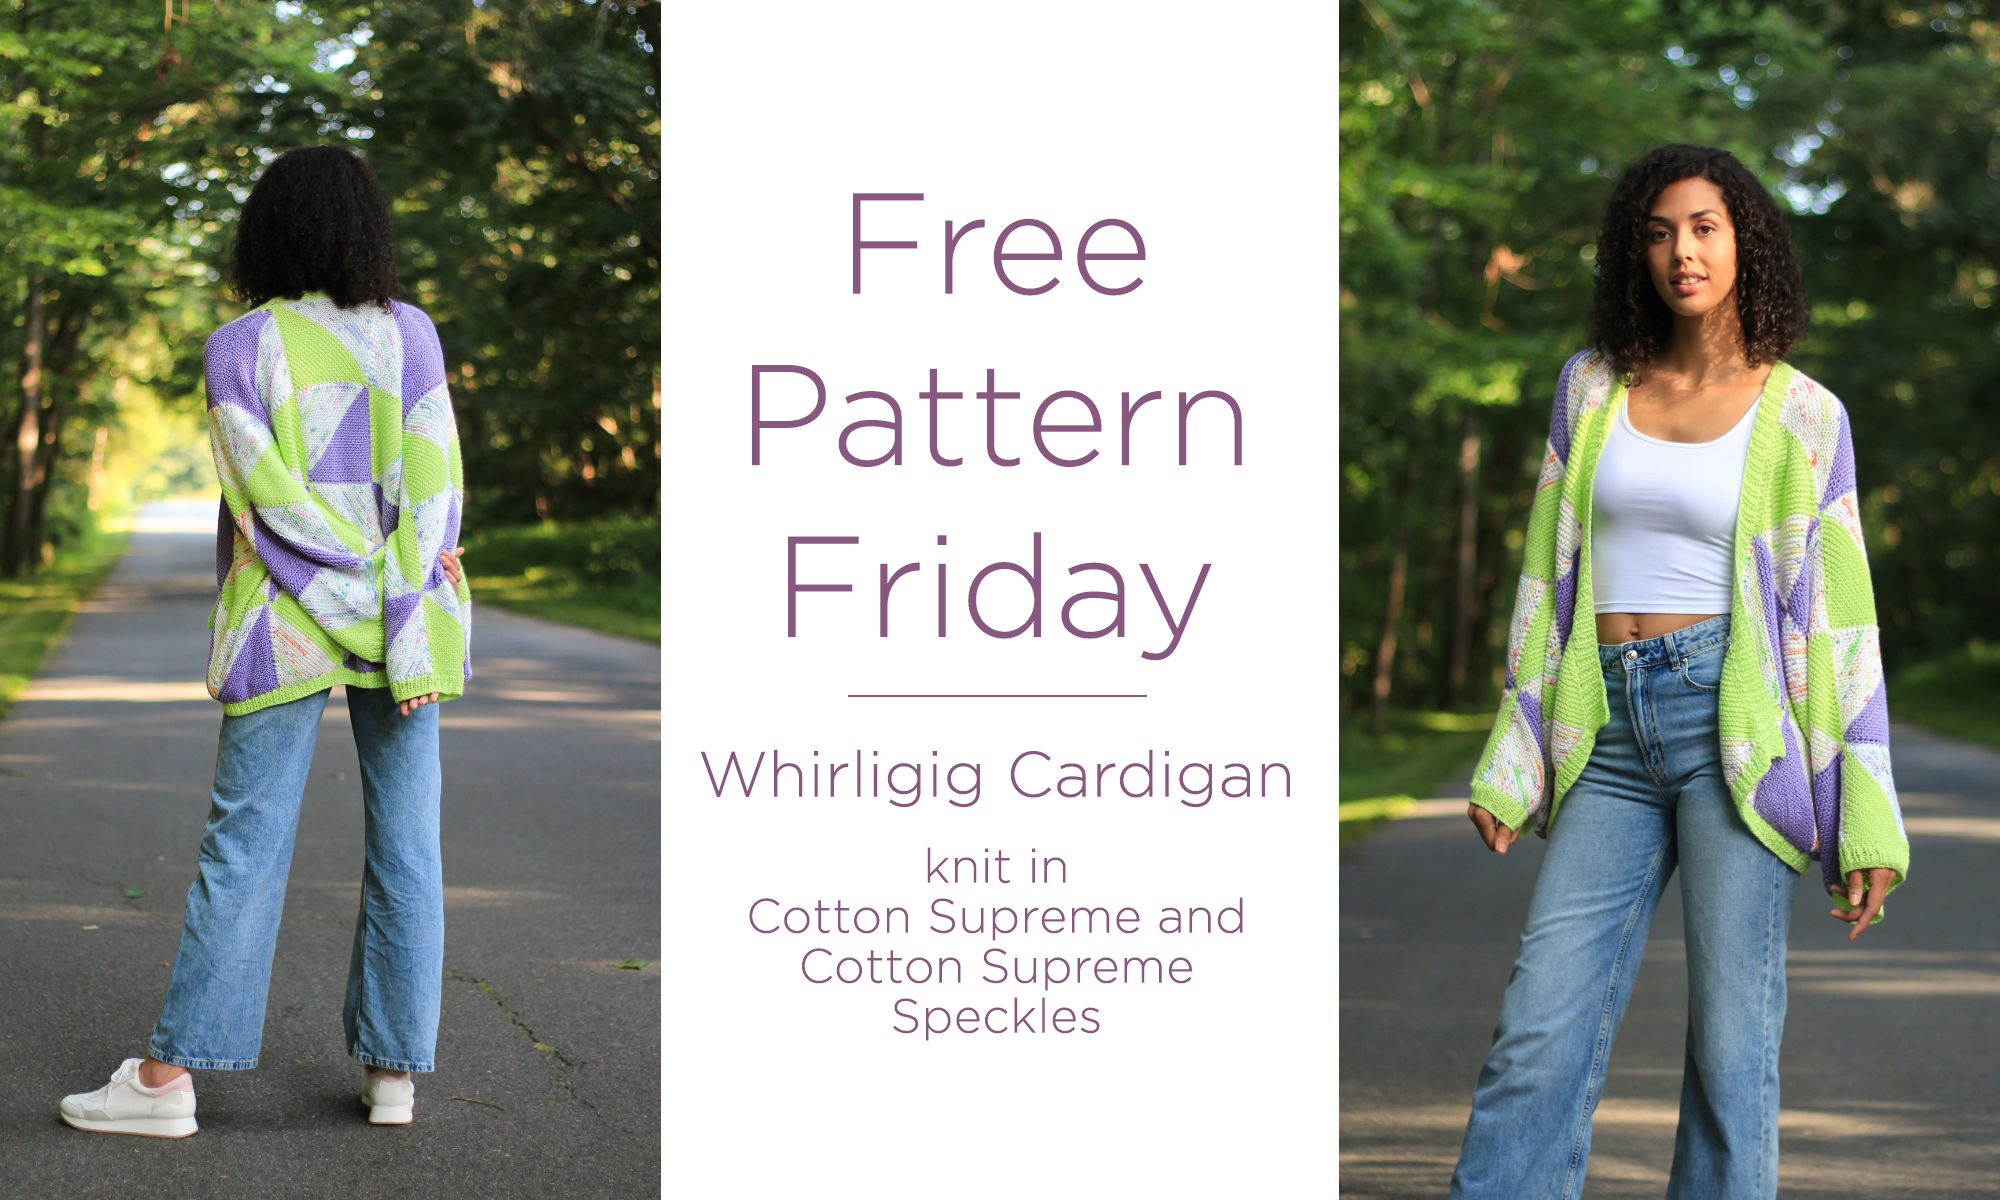 A woman is posed on the left side, facing backwards showing the rear of a knit cardigan. the center of the image reads "Free Pattern Friday, Whirligig Cardigan knit in Cotton Supreme and Cotton Supreme Speckles." The left side of the image shows the woman facing forward and showing a different angle of the knit cardigan.